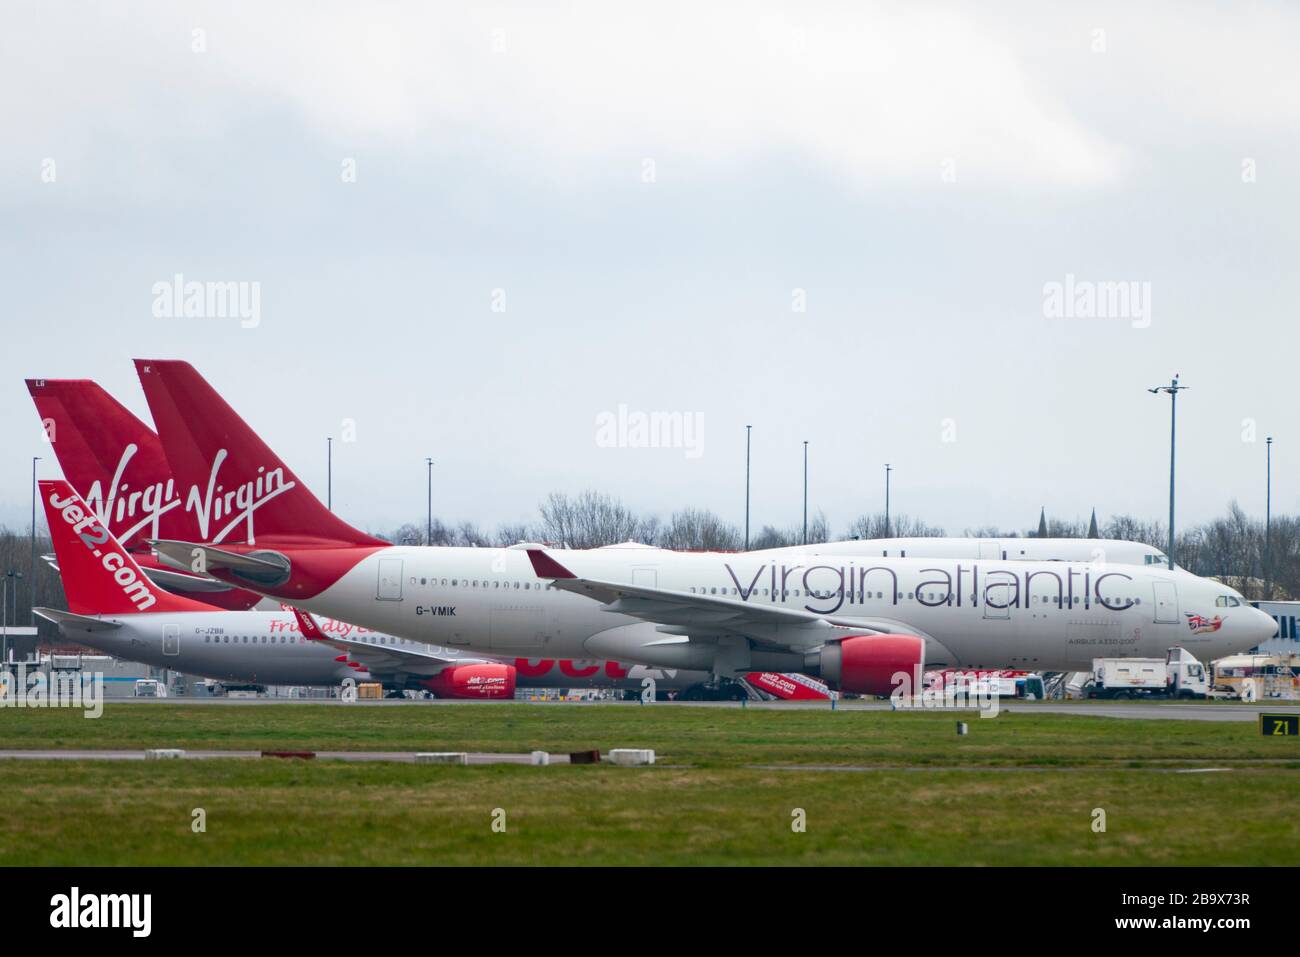 Glasgow, Scotland, UK. 25 March, 2020. Day two of the Government enforced lockdown in the UK. All shops and restaurants and most workplaces remain closed. Cities are very quiet with vast majority of population staying indoors. Pictured; Virgin Atlantic passenger aircraft remain grounded and parked at Glasgow Airport. Iain Masterton/Alamy Live News Stock Photo